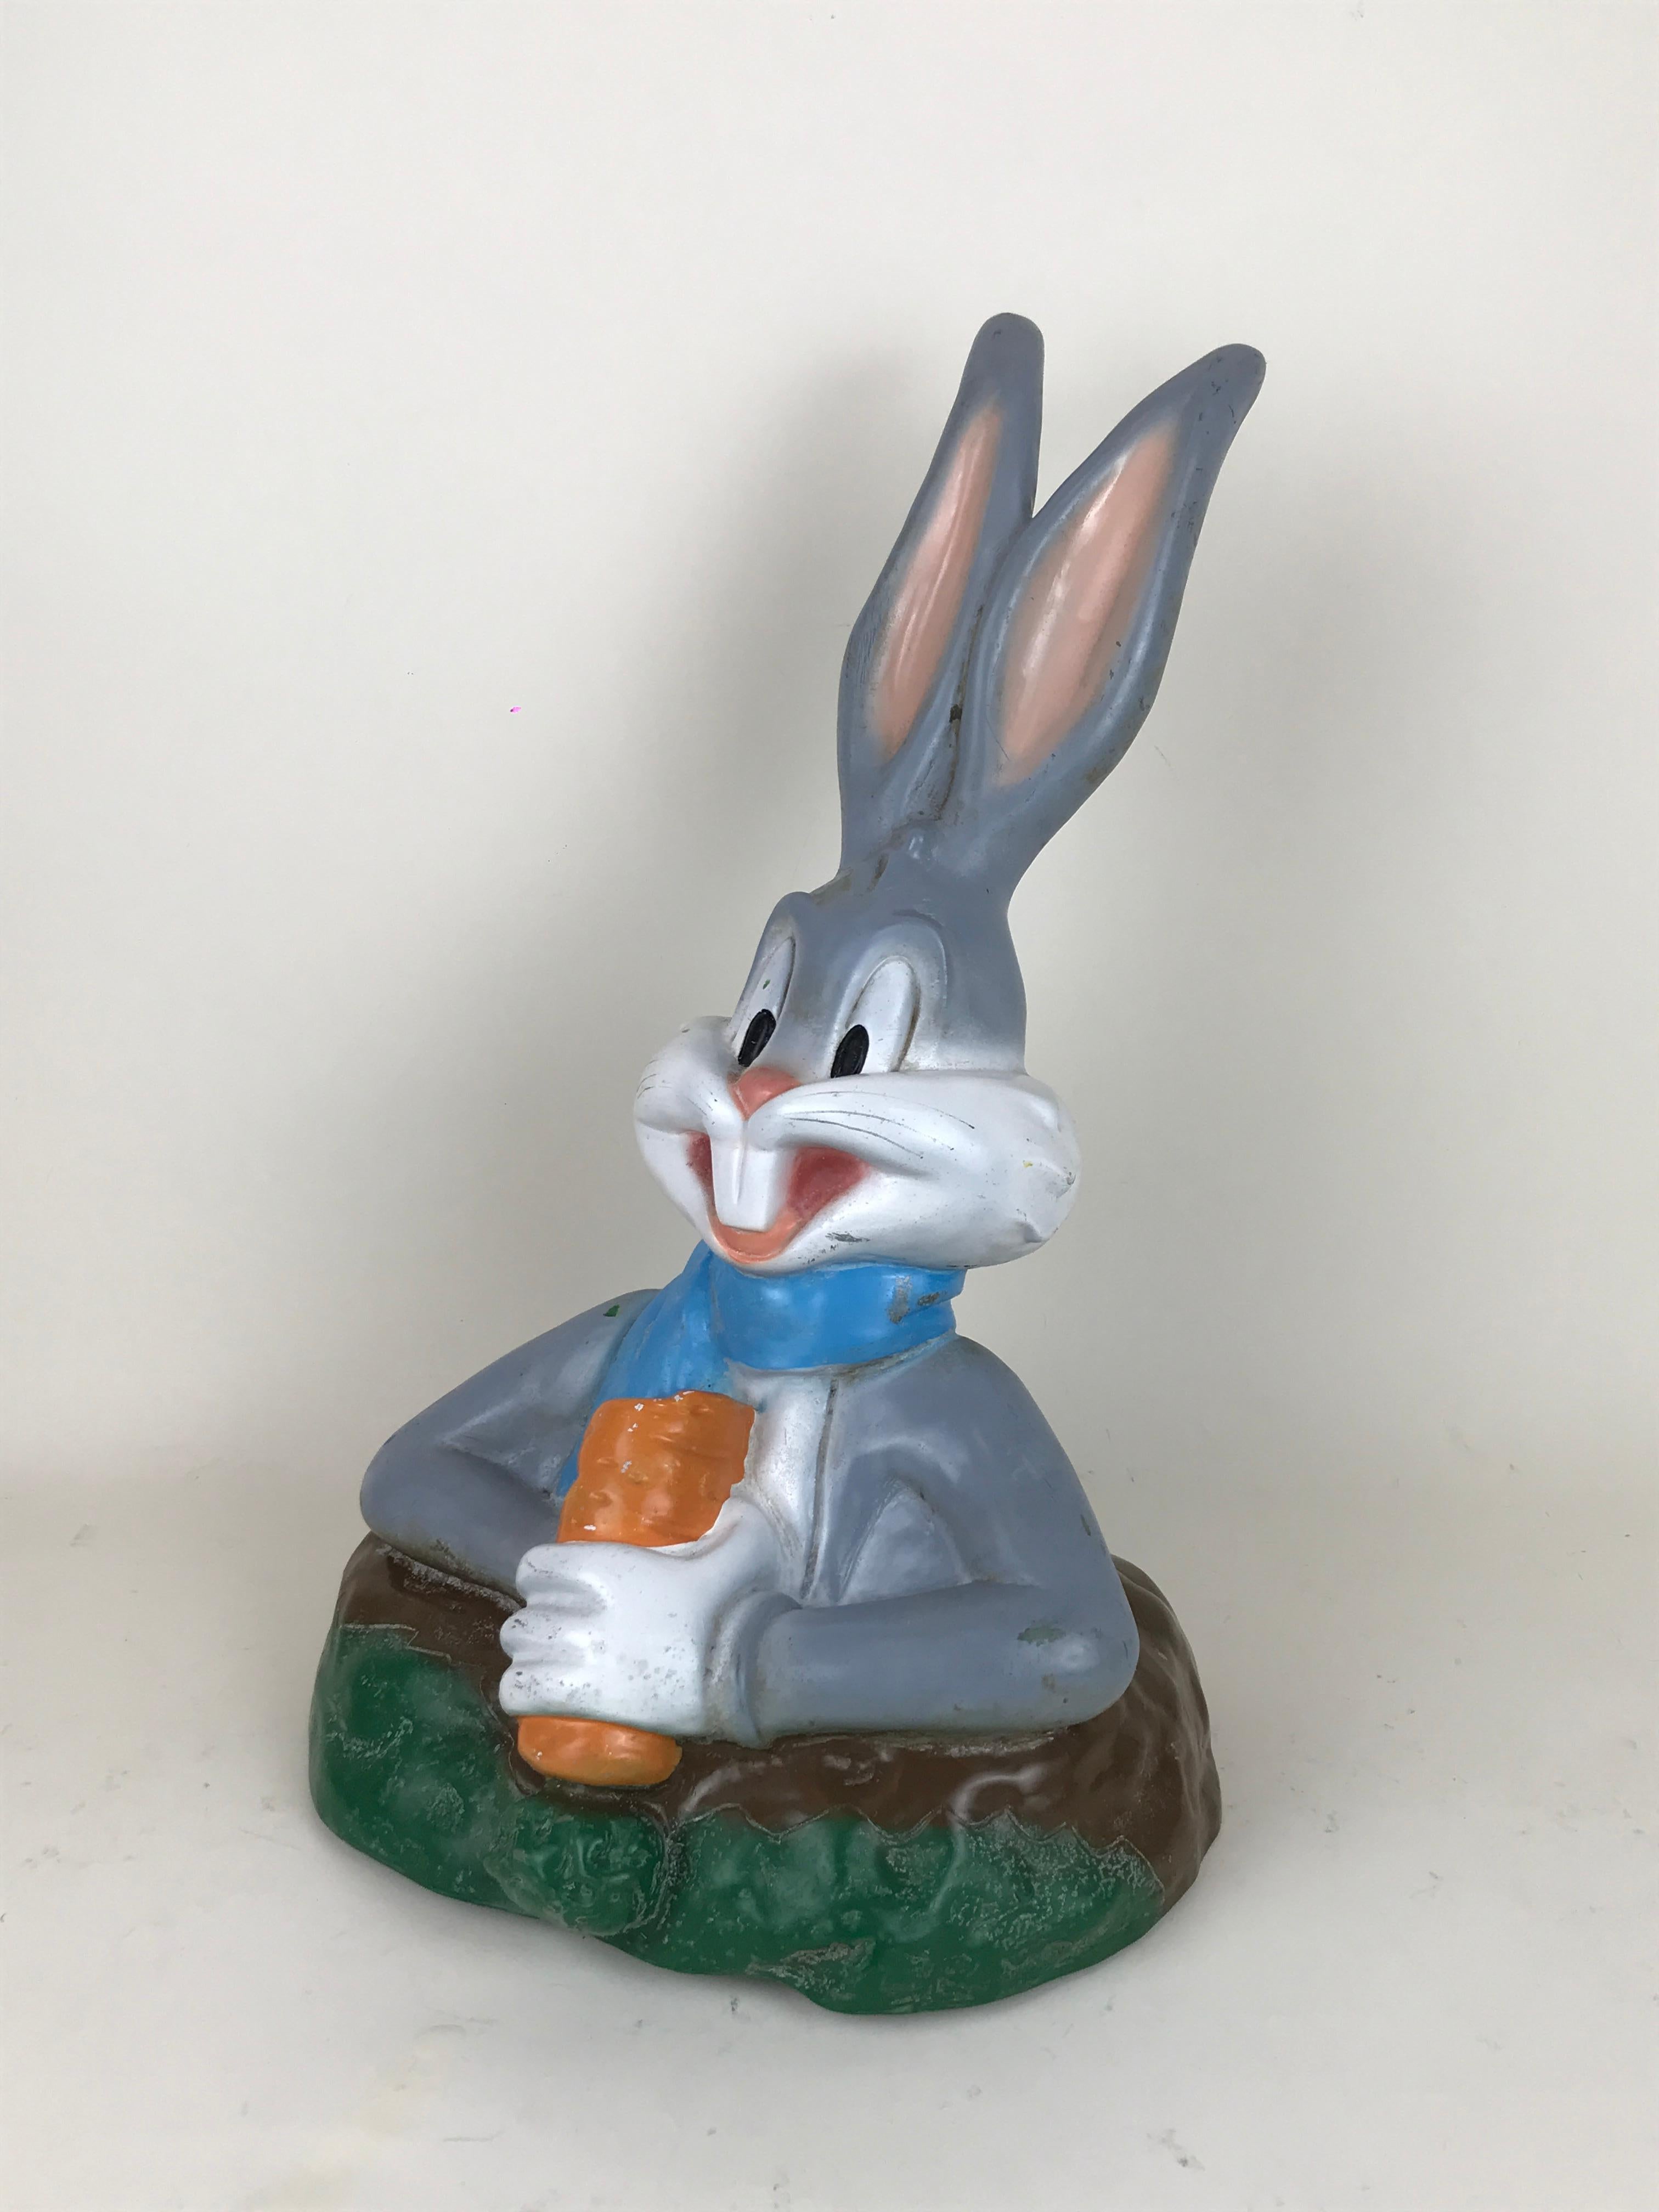 Vintage plastic half body sculpture of Bugs Bunny eating a carrot while standing from his rabbit hole. Made for Warner Bros. by Austrian maker Celloplast in the 1992.

Bugs Bunny holds a carrot and wears a blue scarf around the neck.

Marked TM